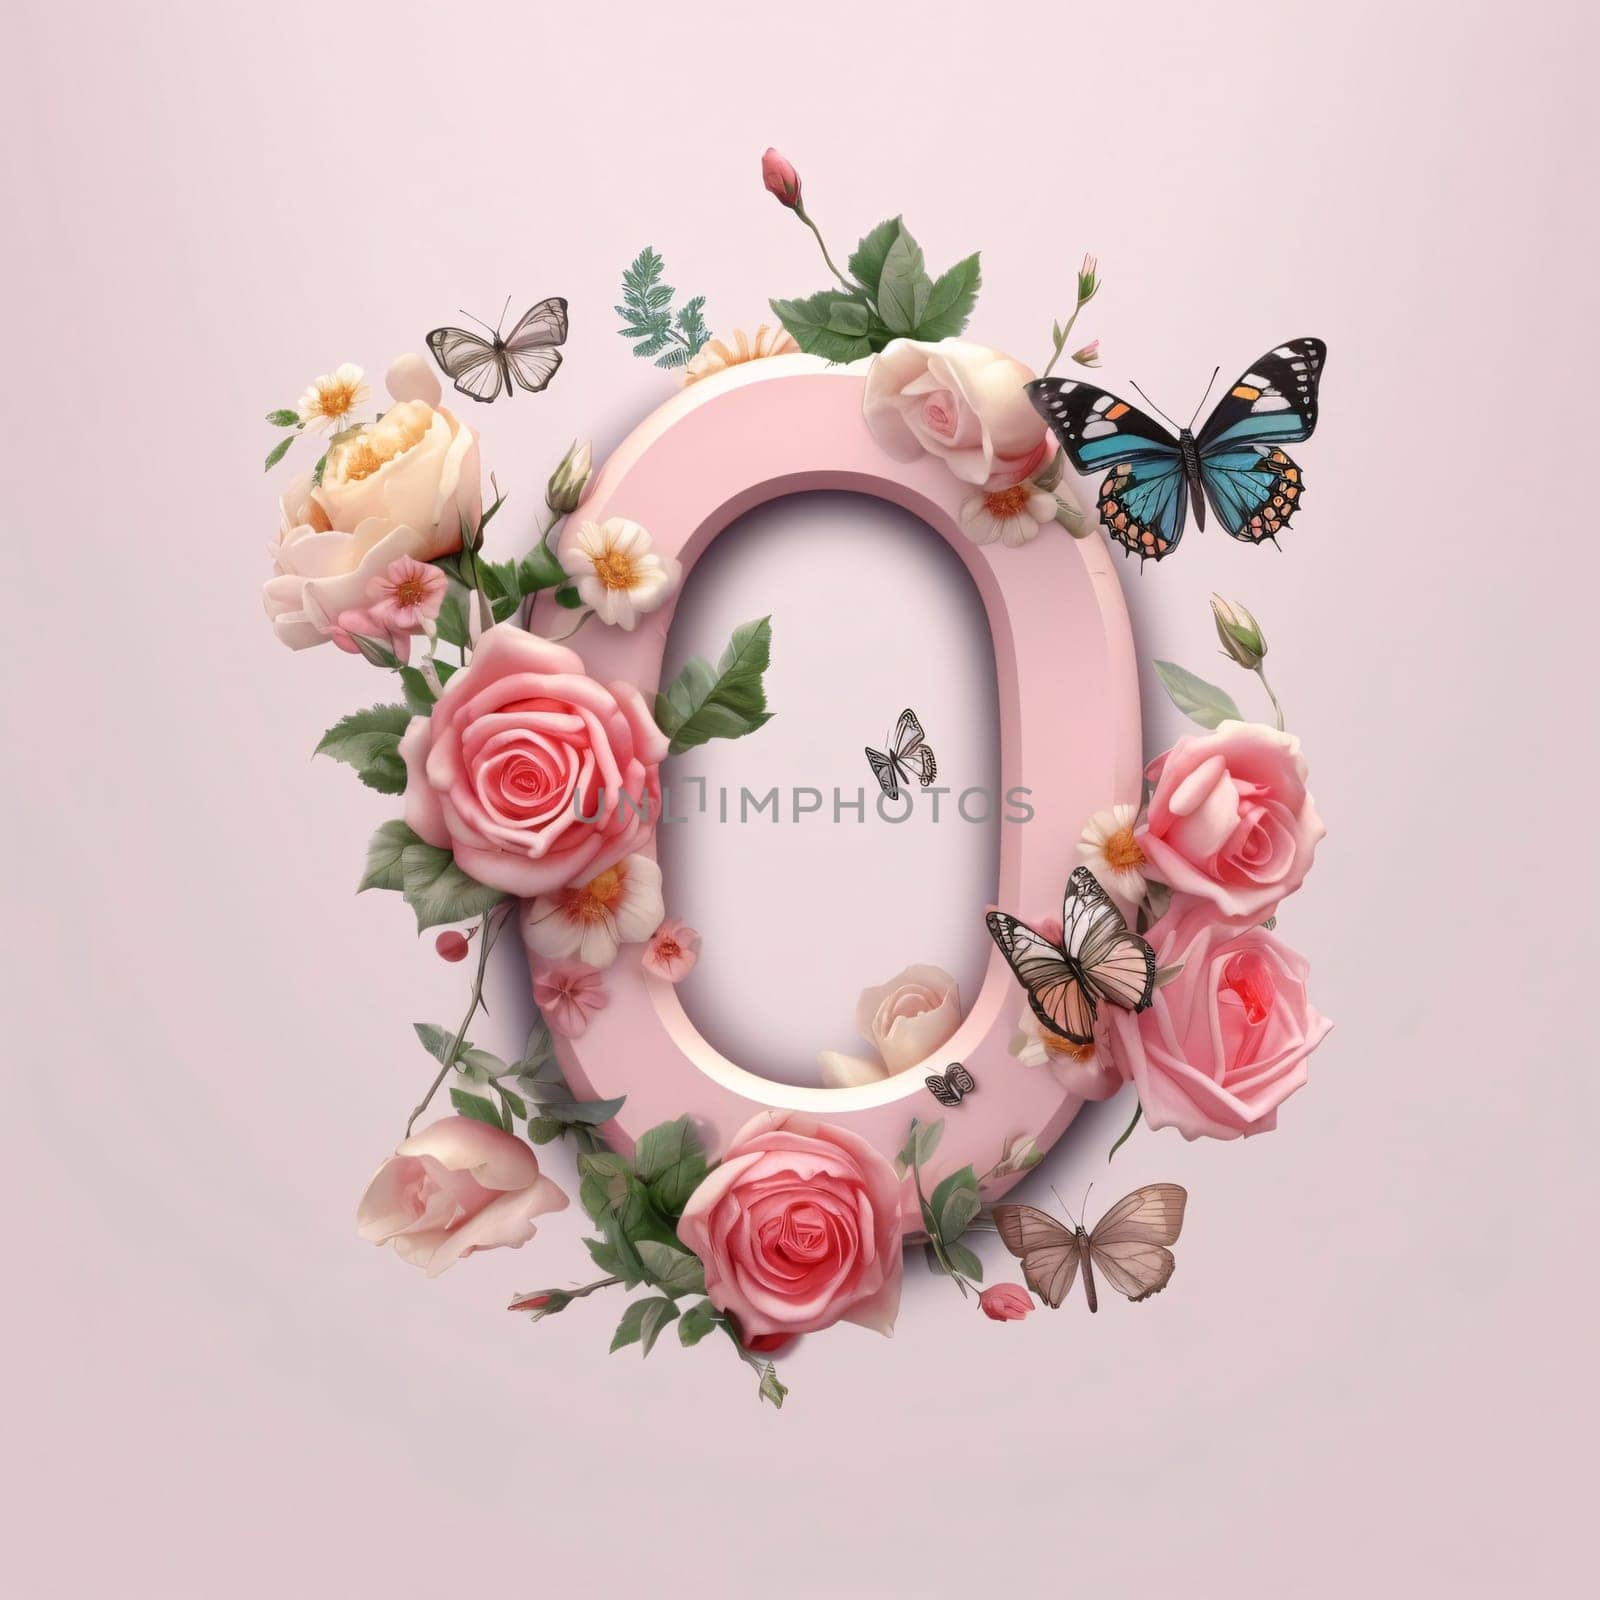 Graphic alphabet letters: Letter O decorated with pink roses and butterflies, 3d illustration.